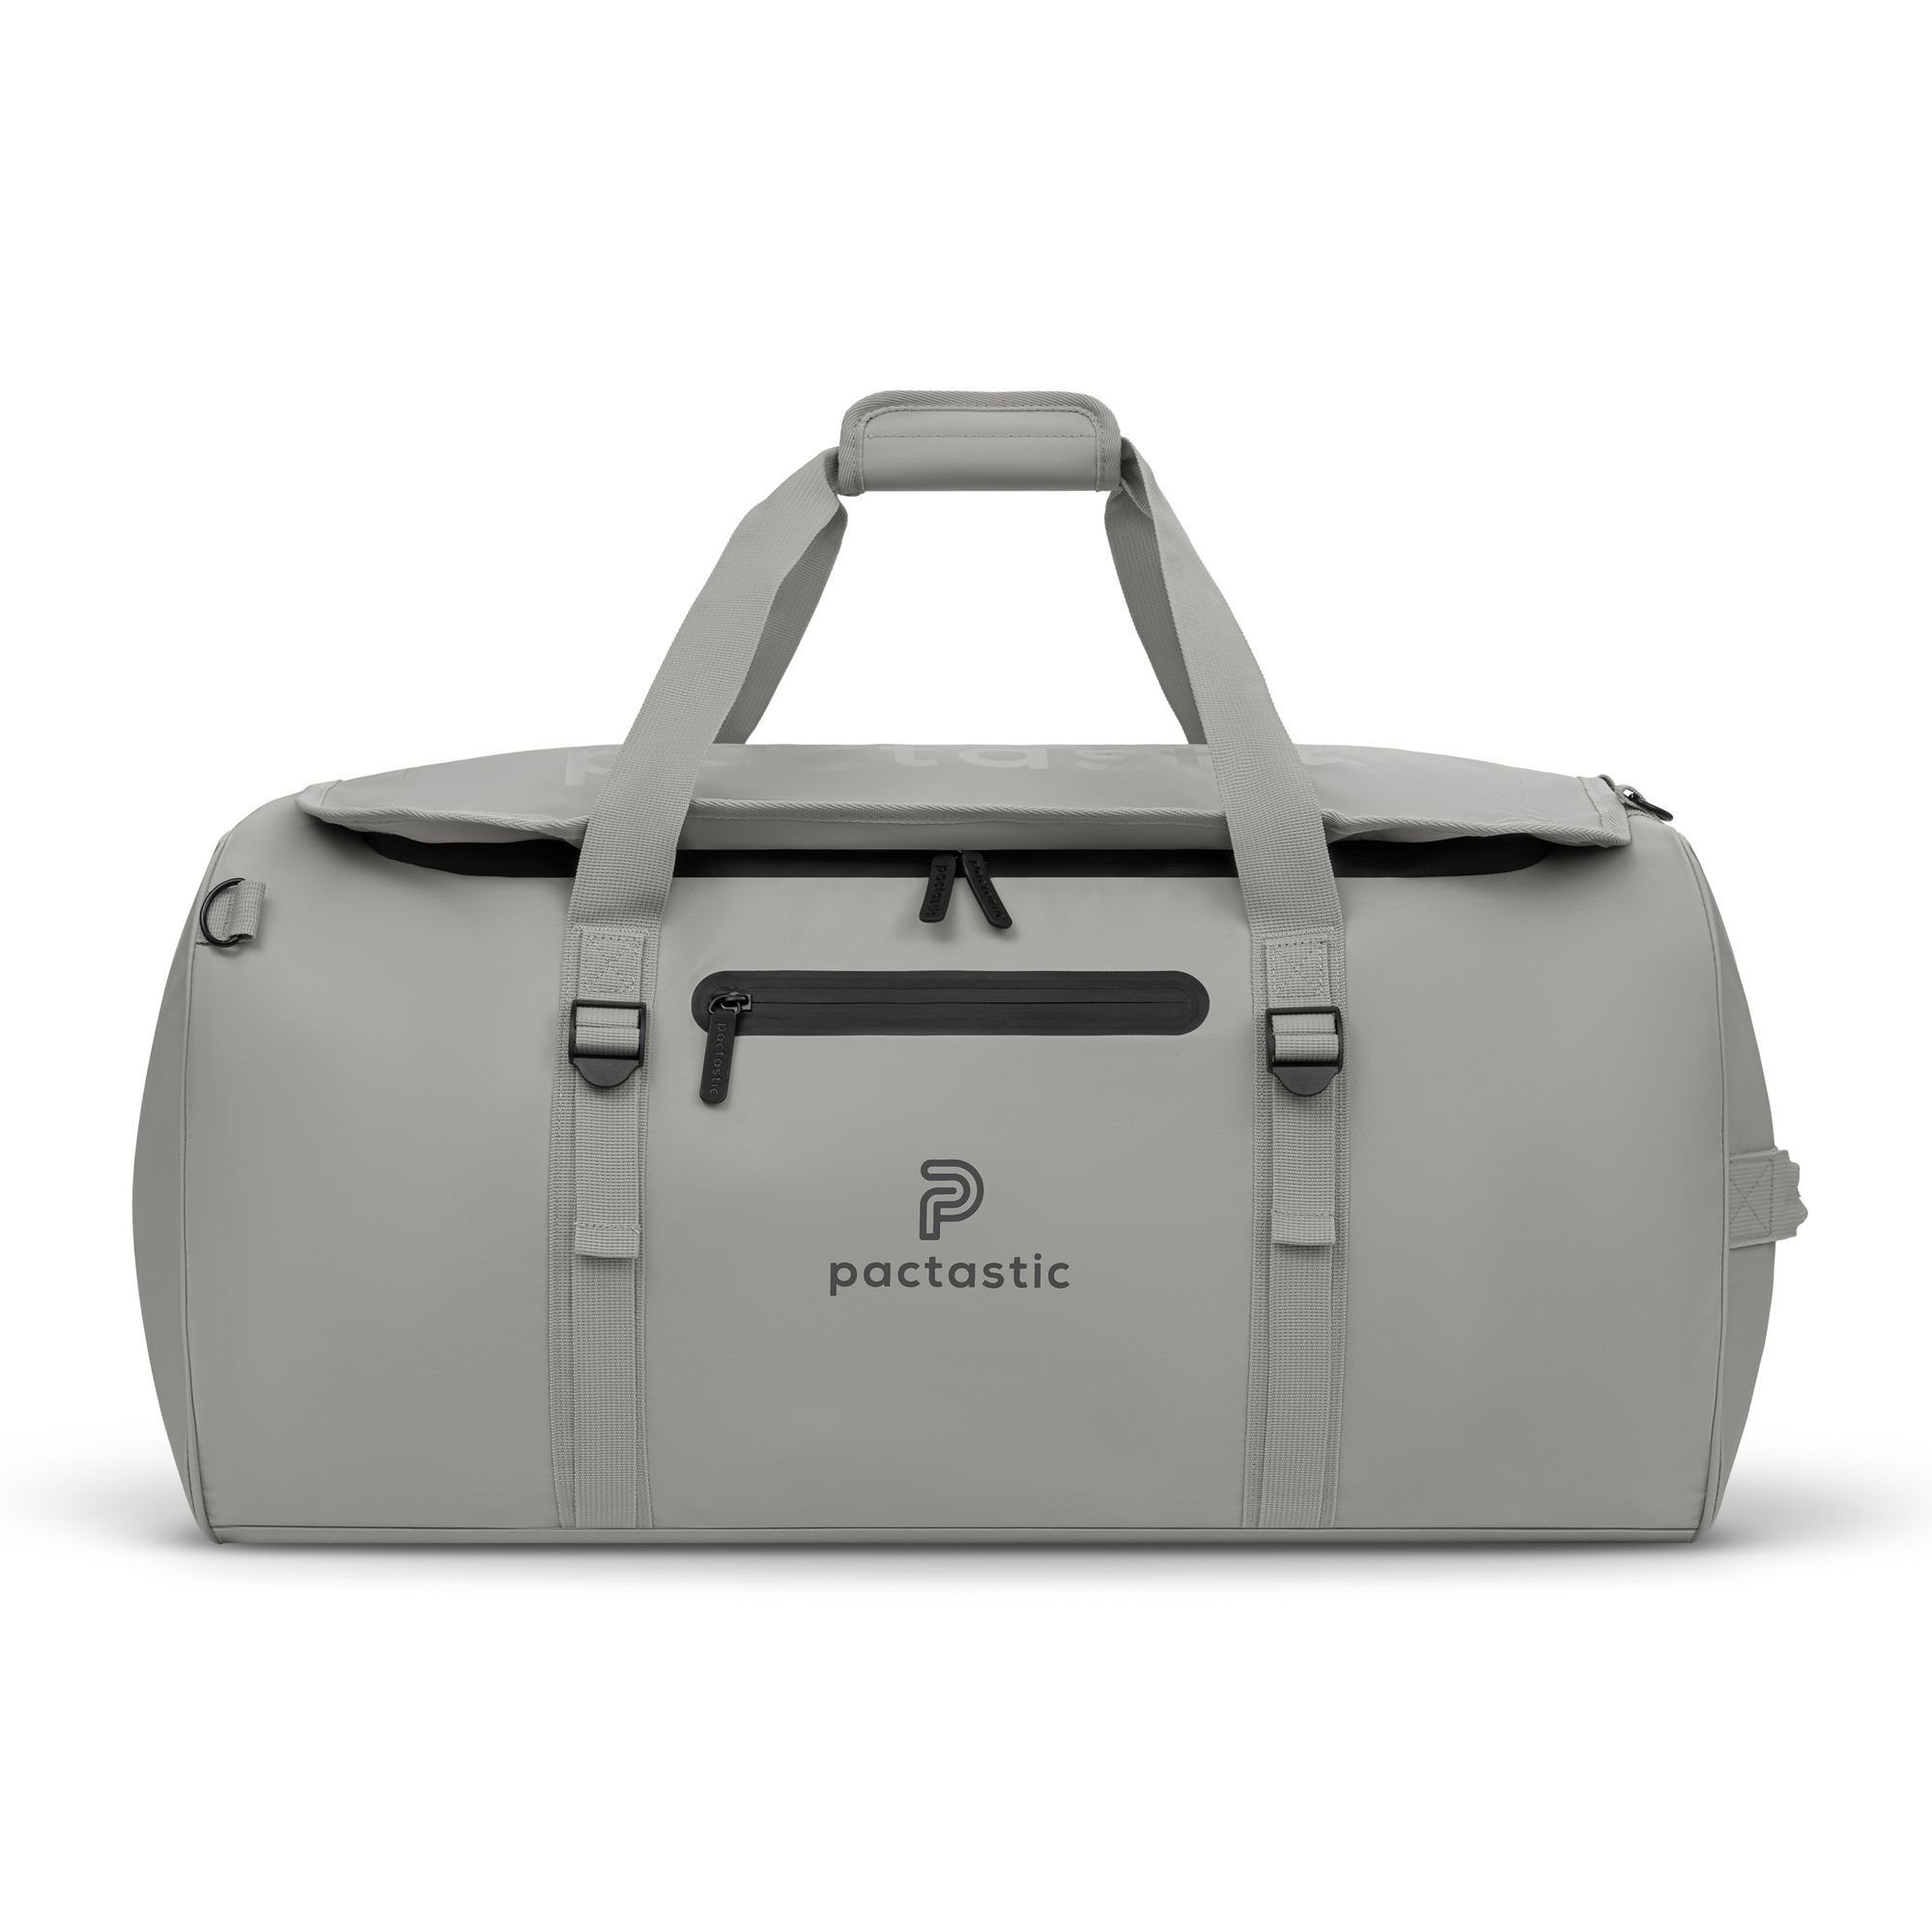 Tech-Material Veganes Urban Collection, Pactastic grey Weekender